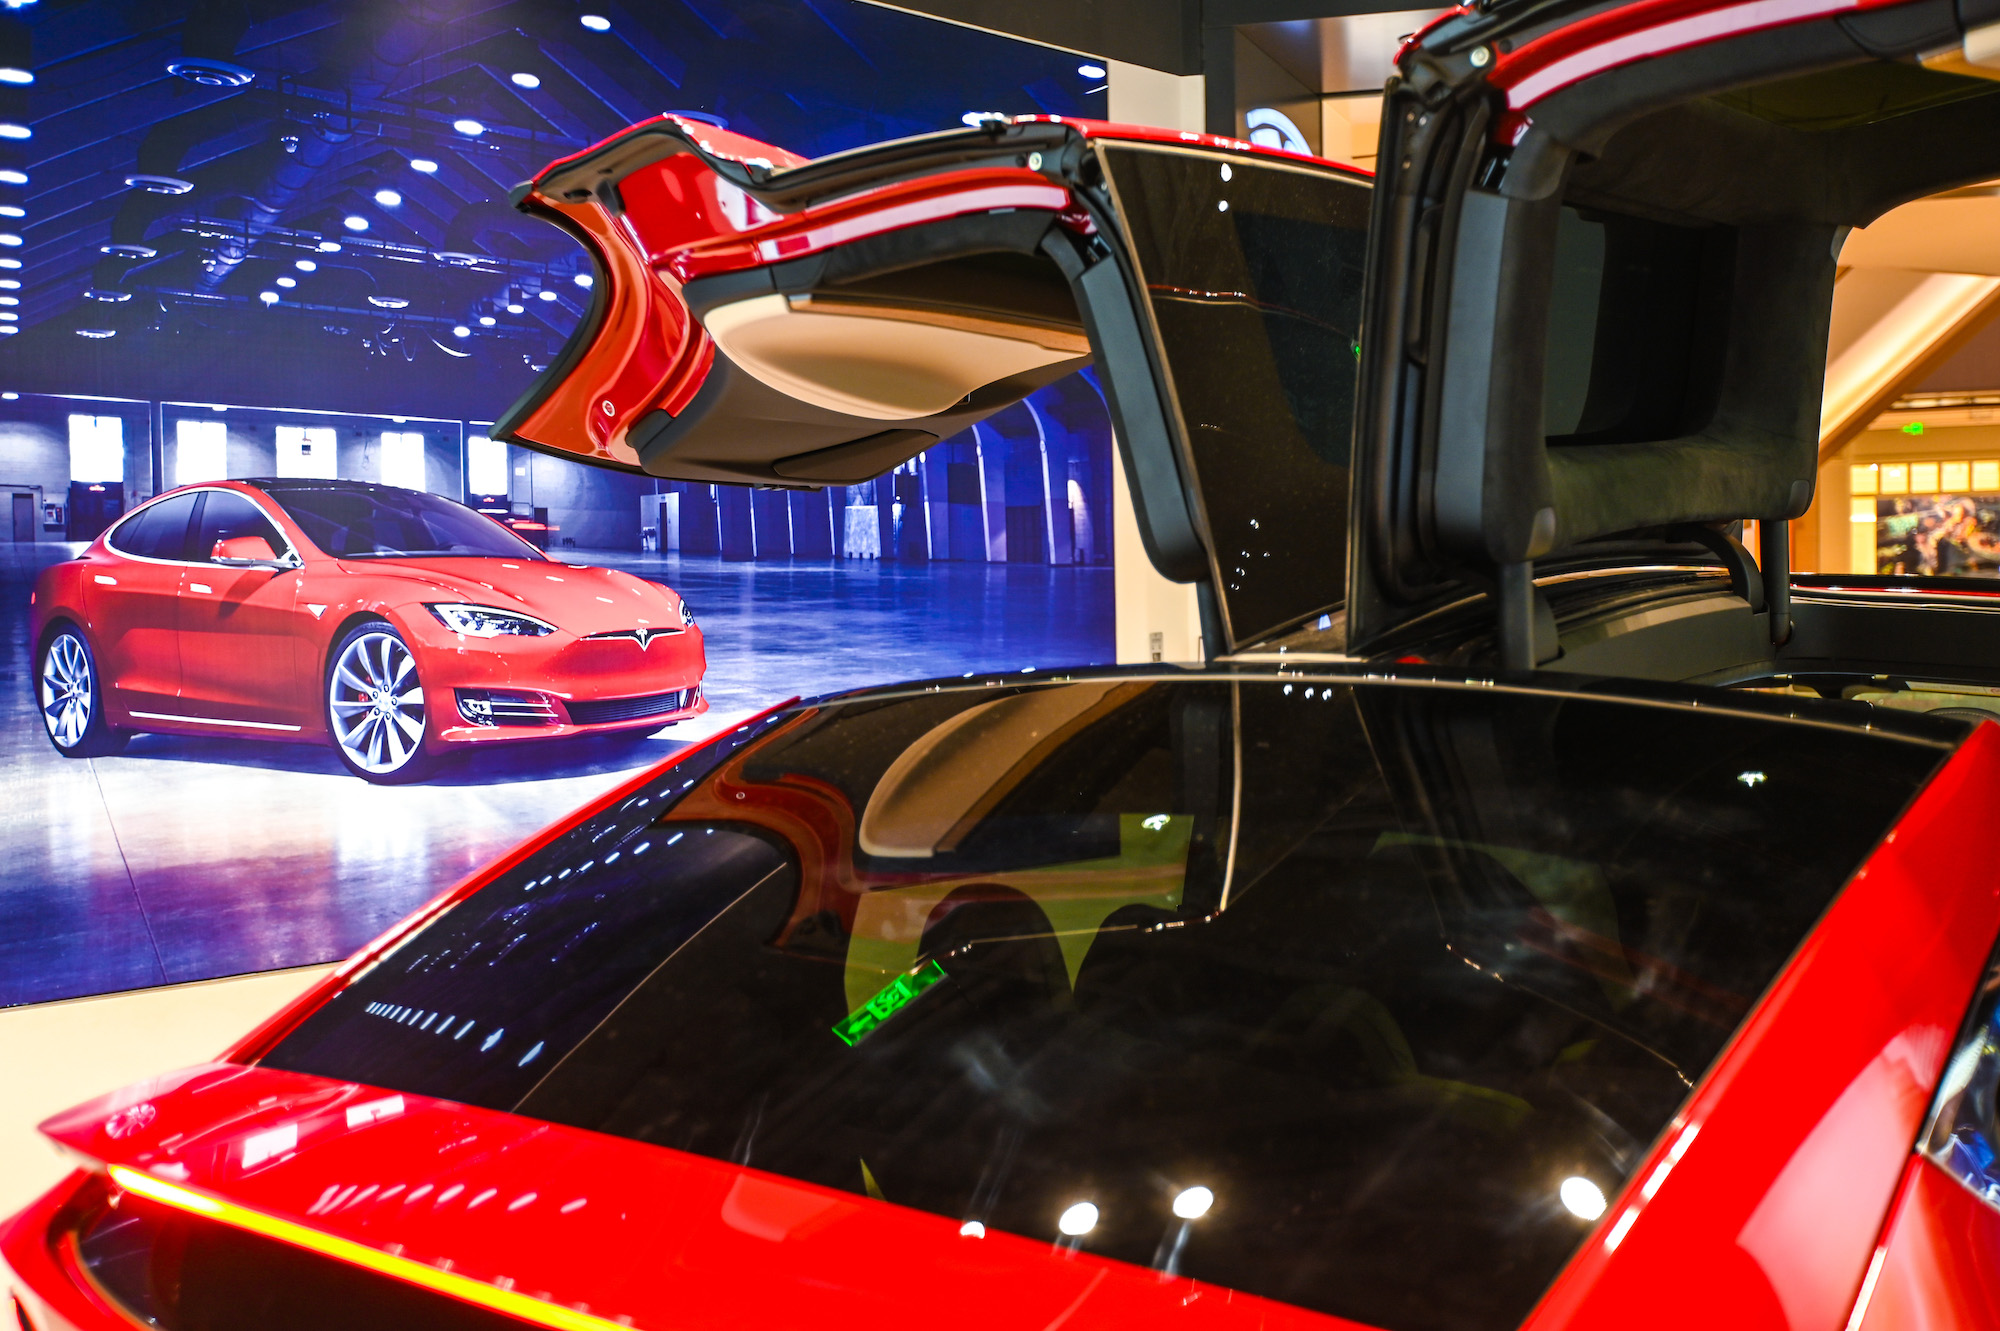 A red Tesla Model X electric SUV parked in a showroom in Shanghai, China, on January 4, 2021